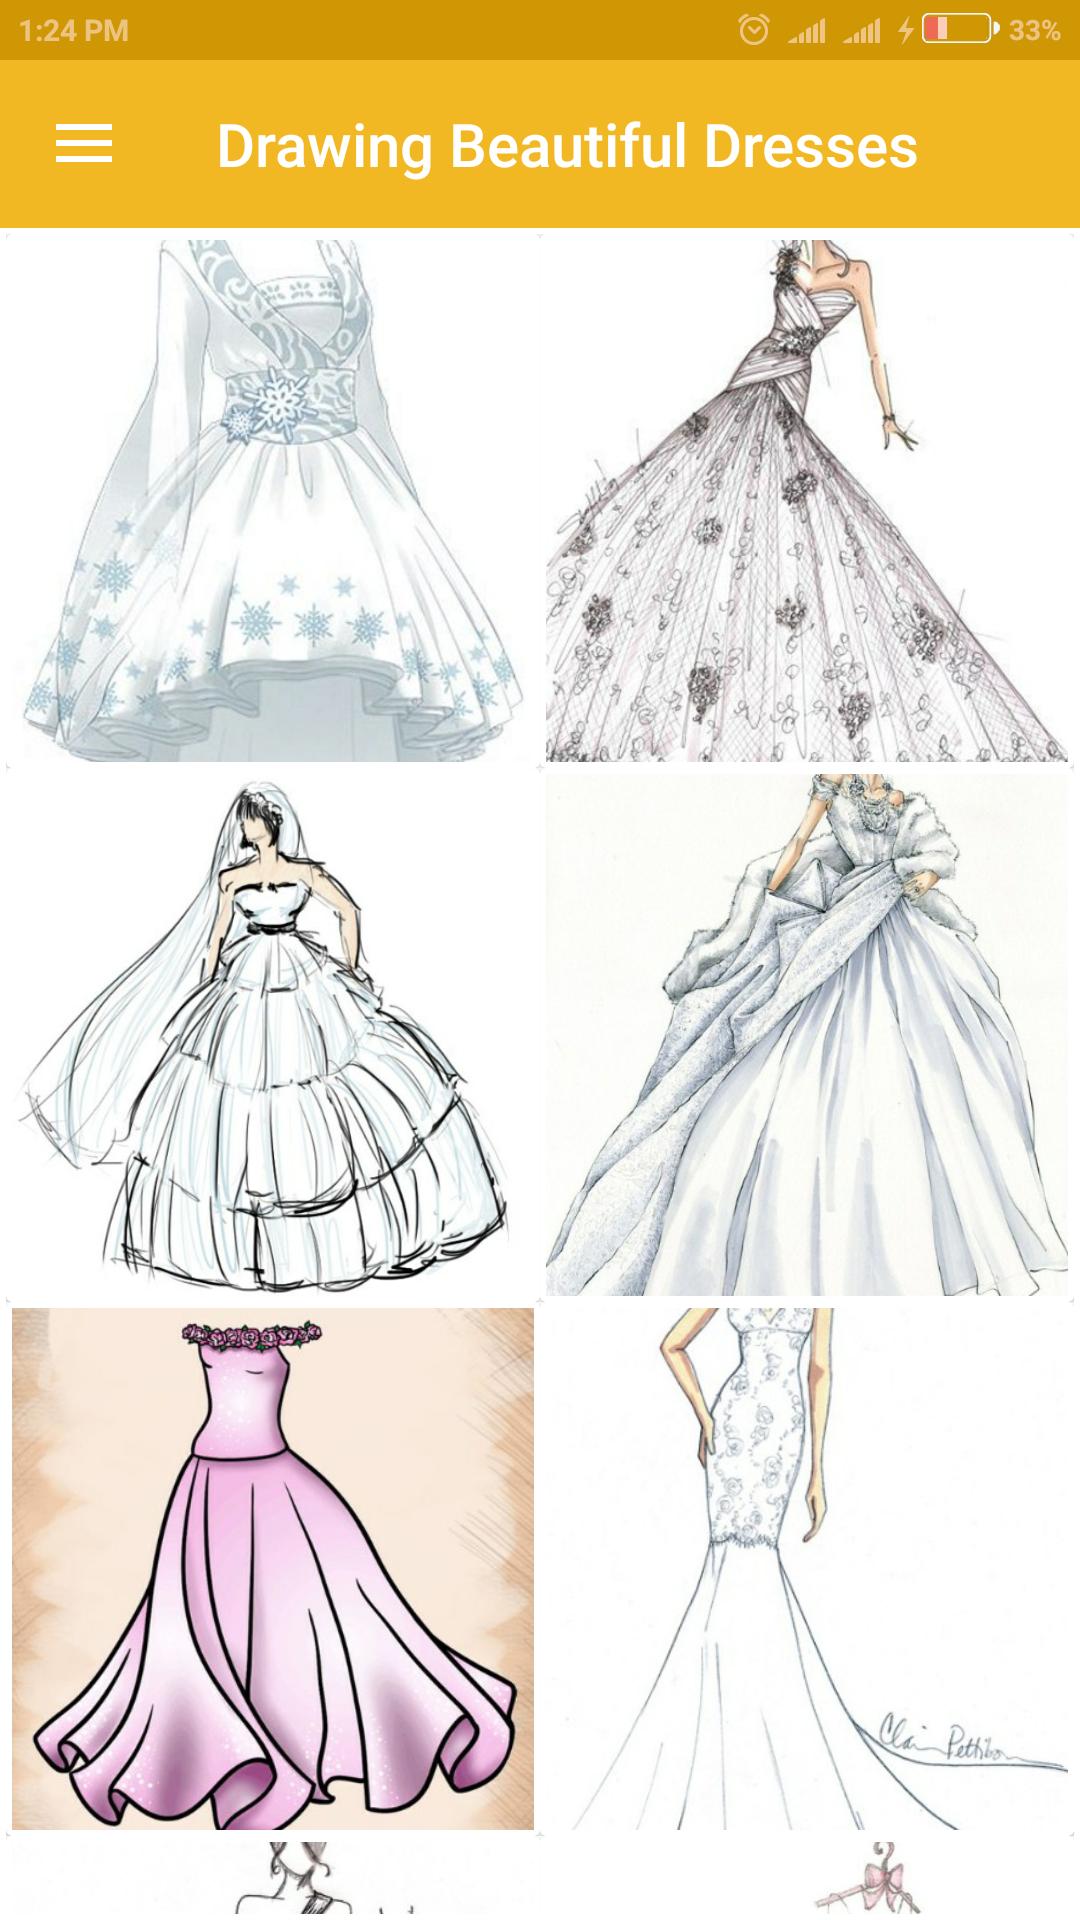 Drawing Beautiful Dresses for Android - APK Download